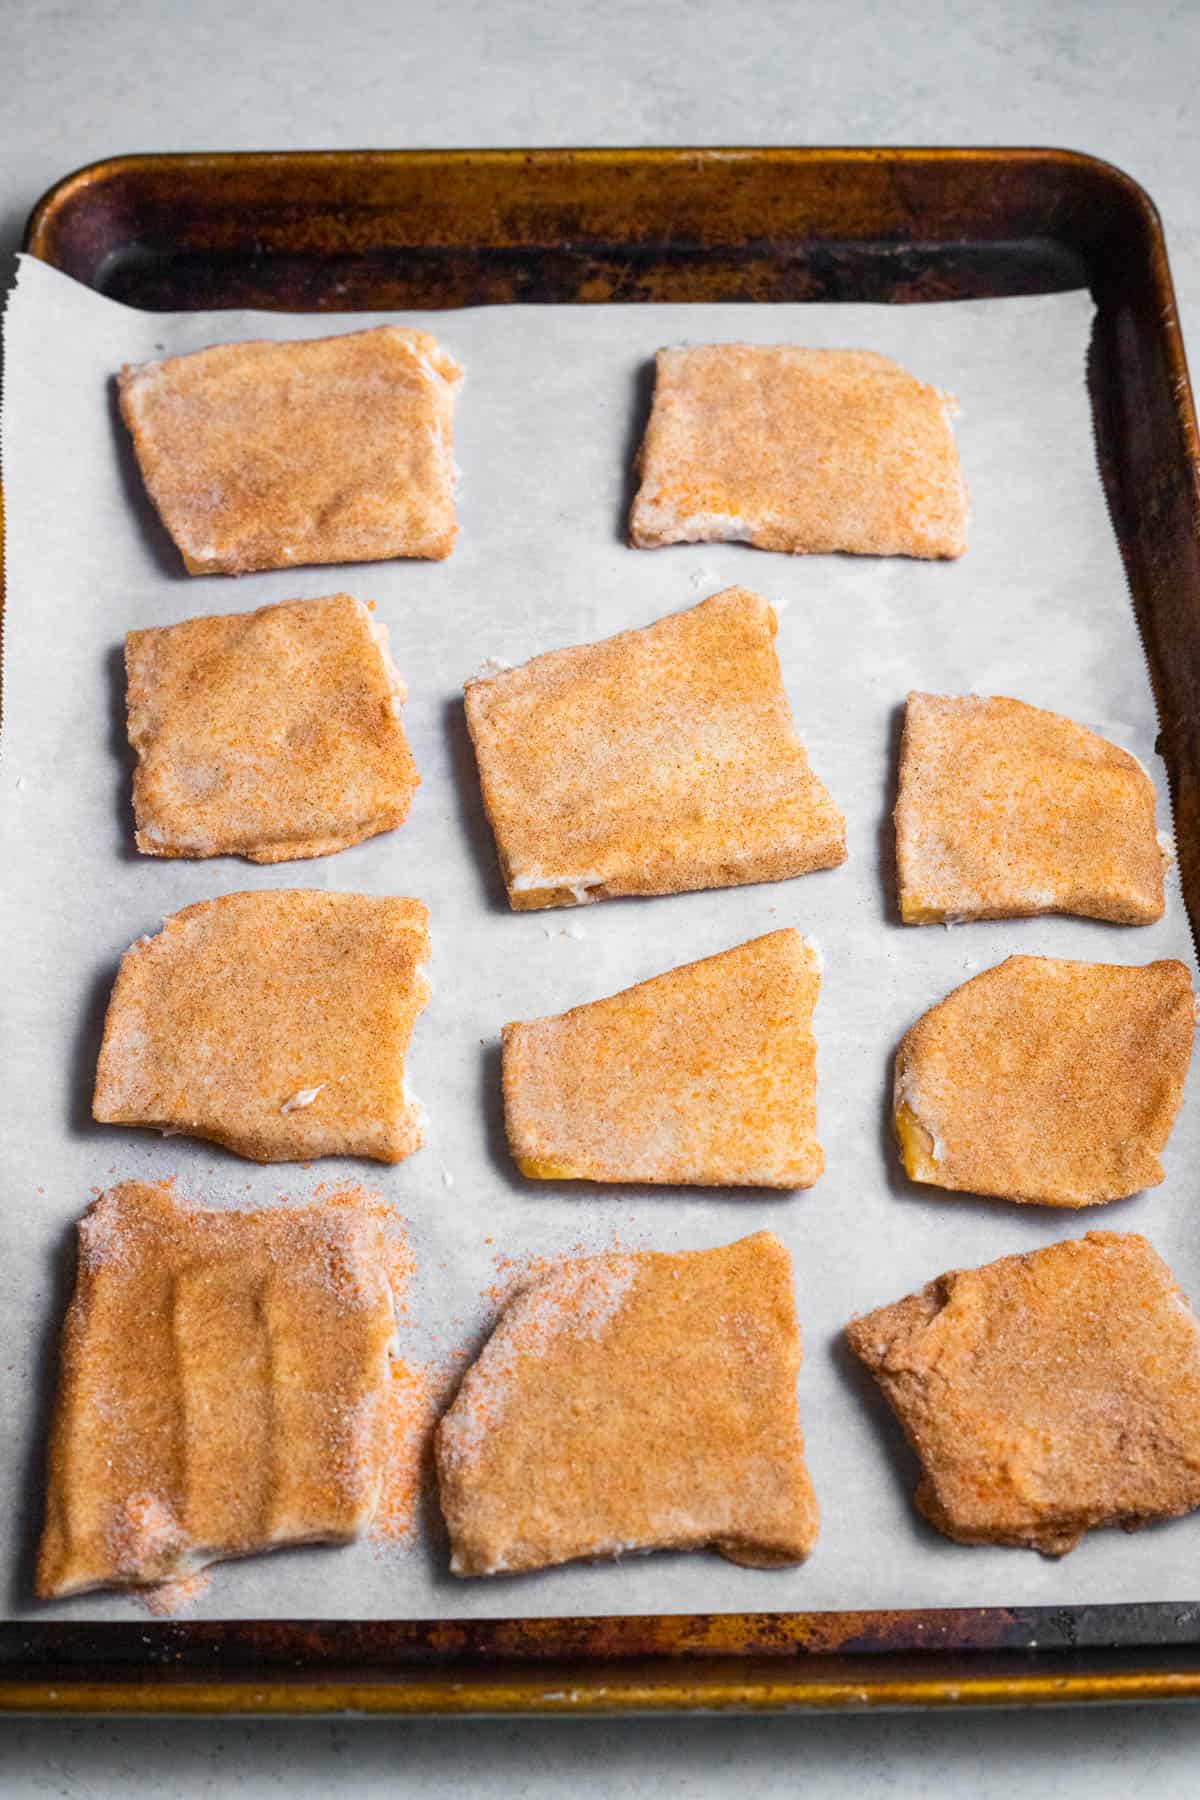 A pan of coated churro toffee.